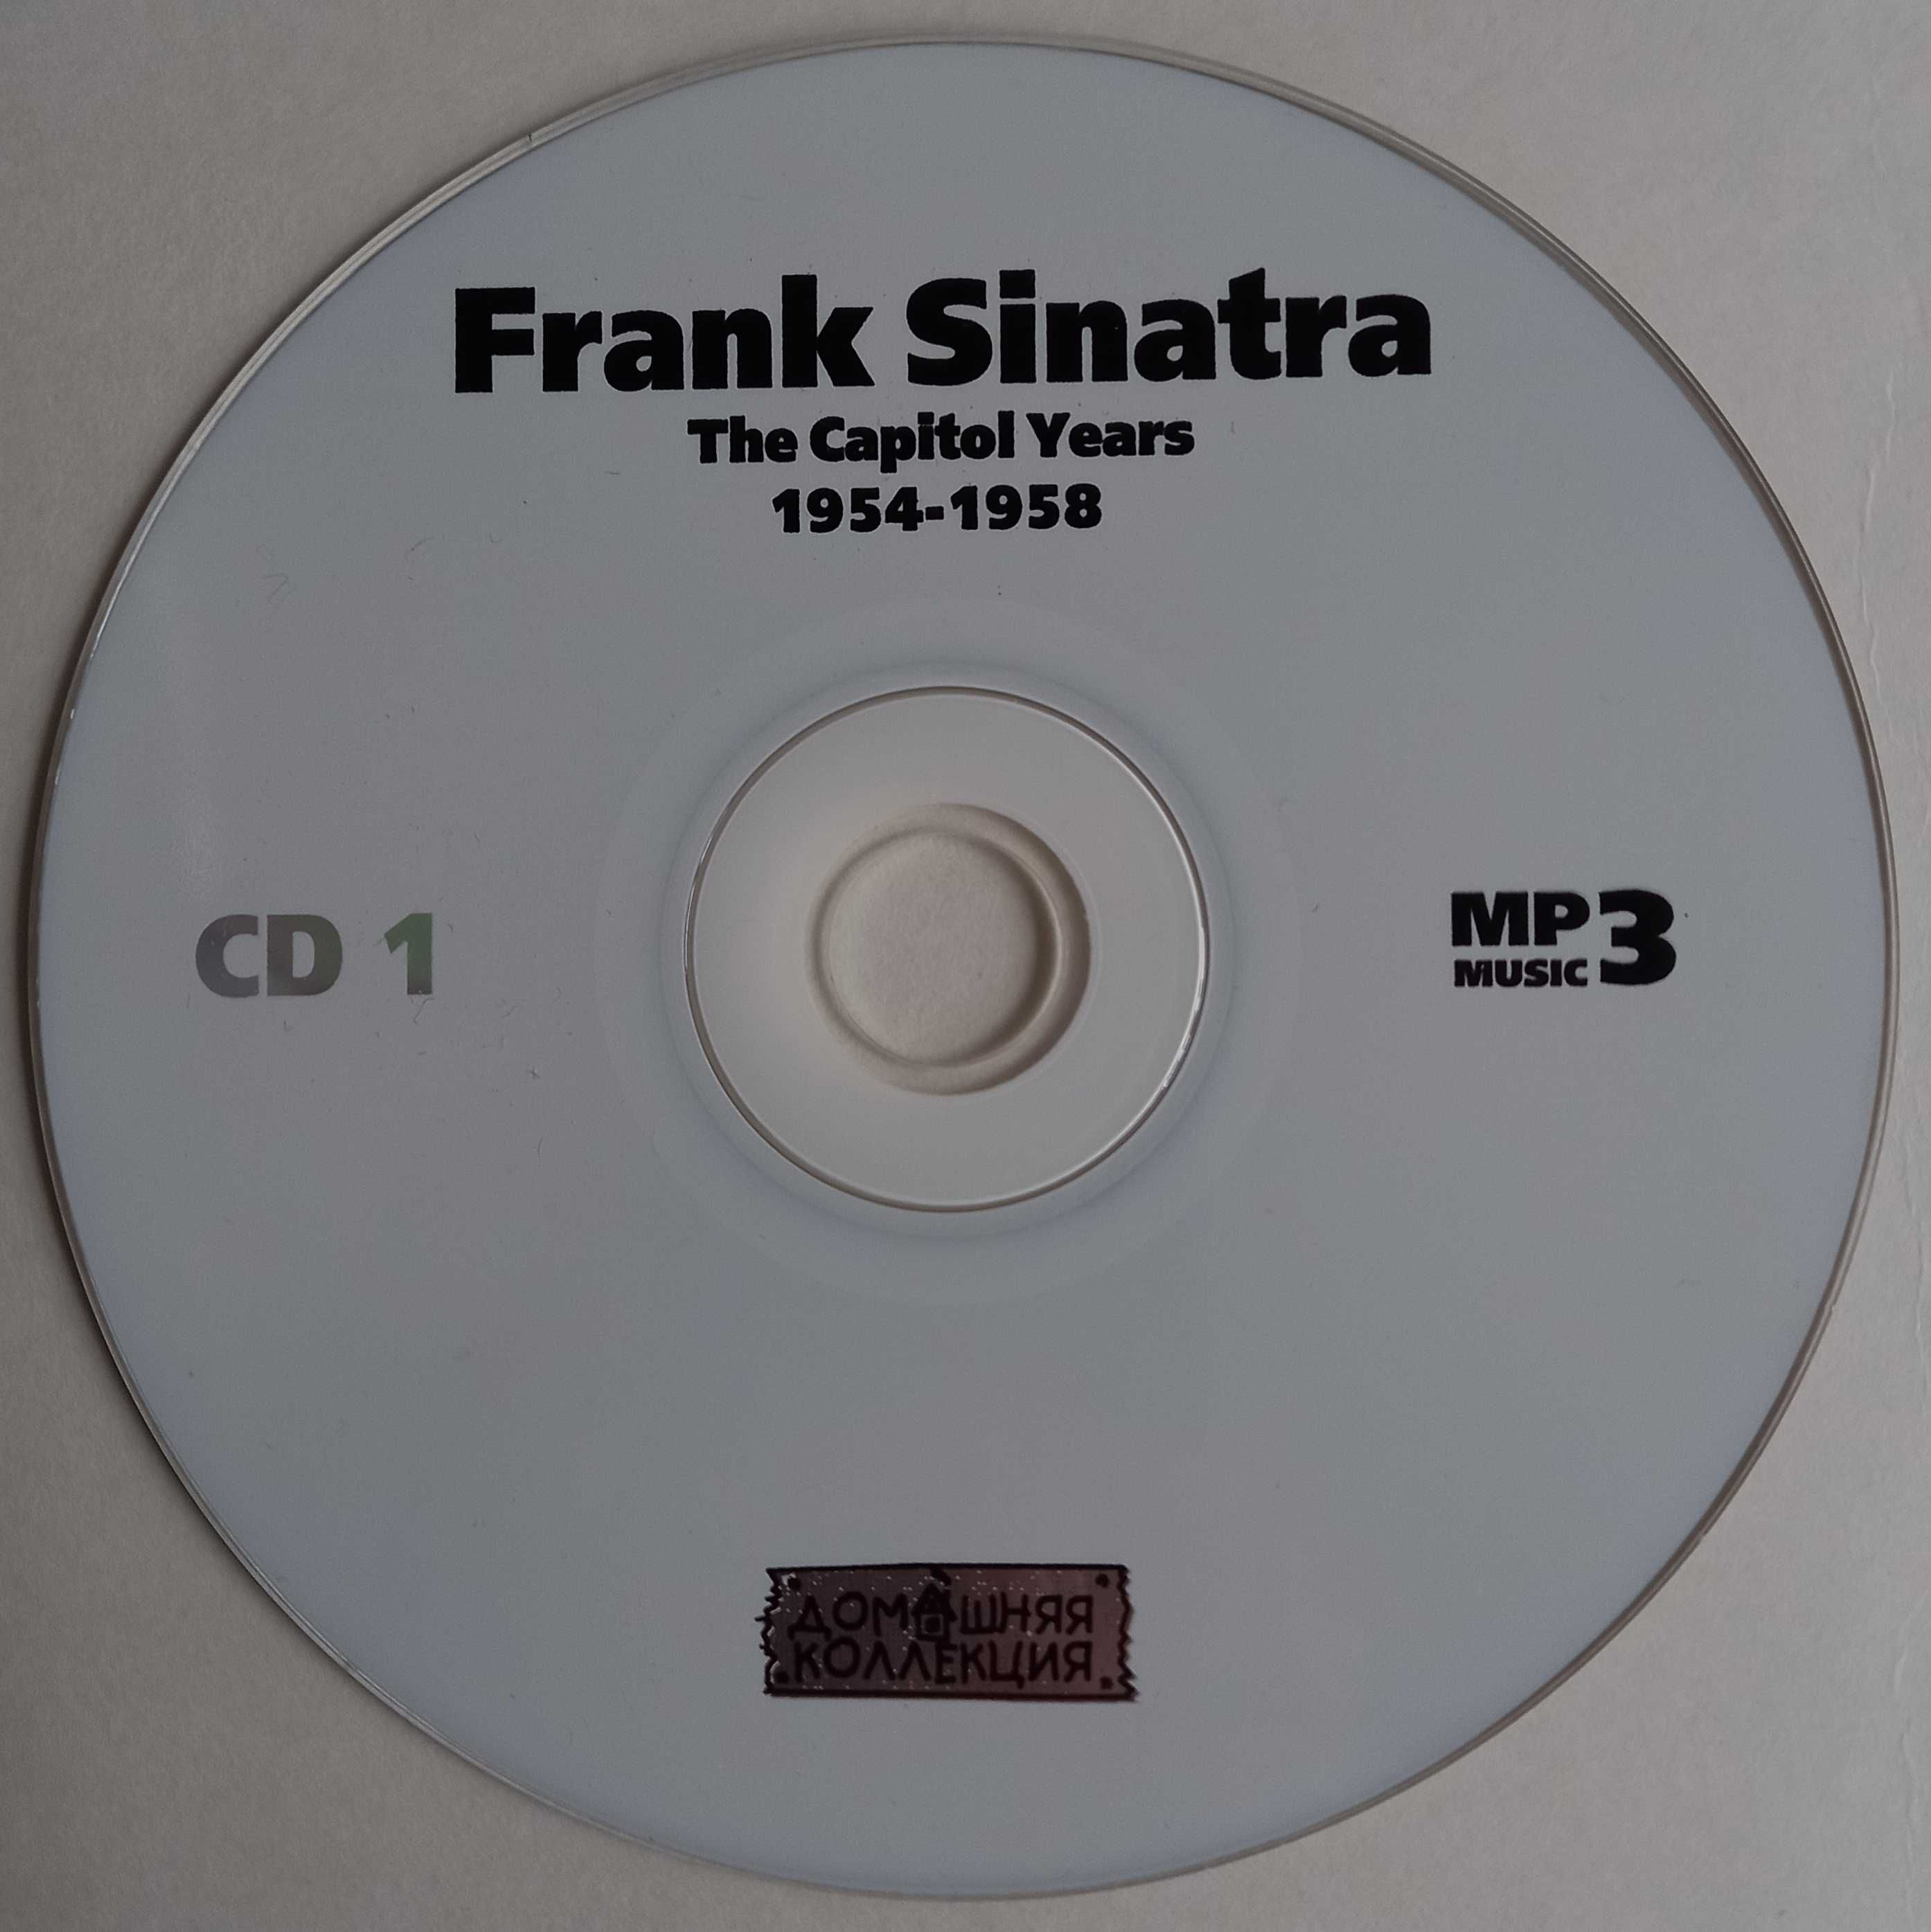 CD Frank Sinatra "The Capitol Years 1954-1962"